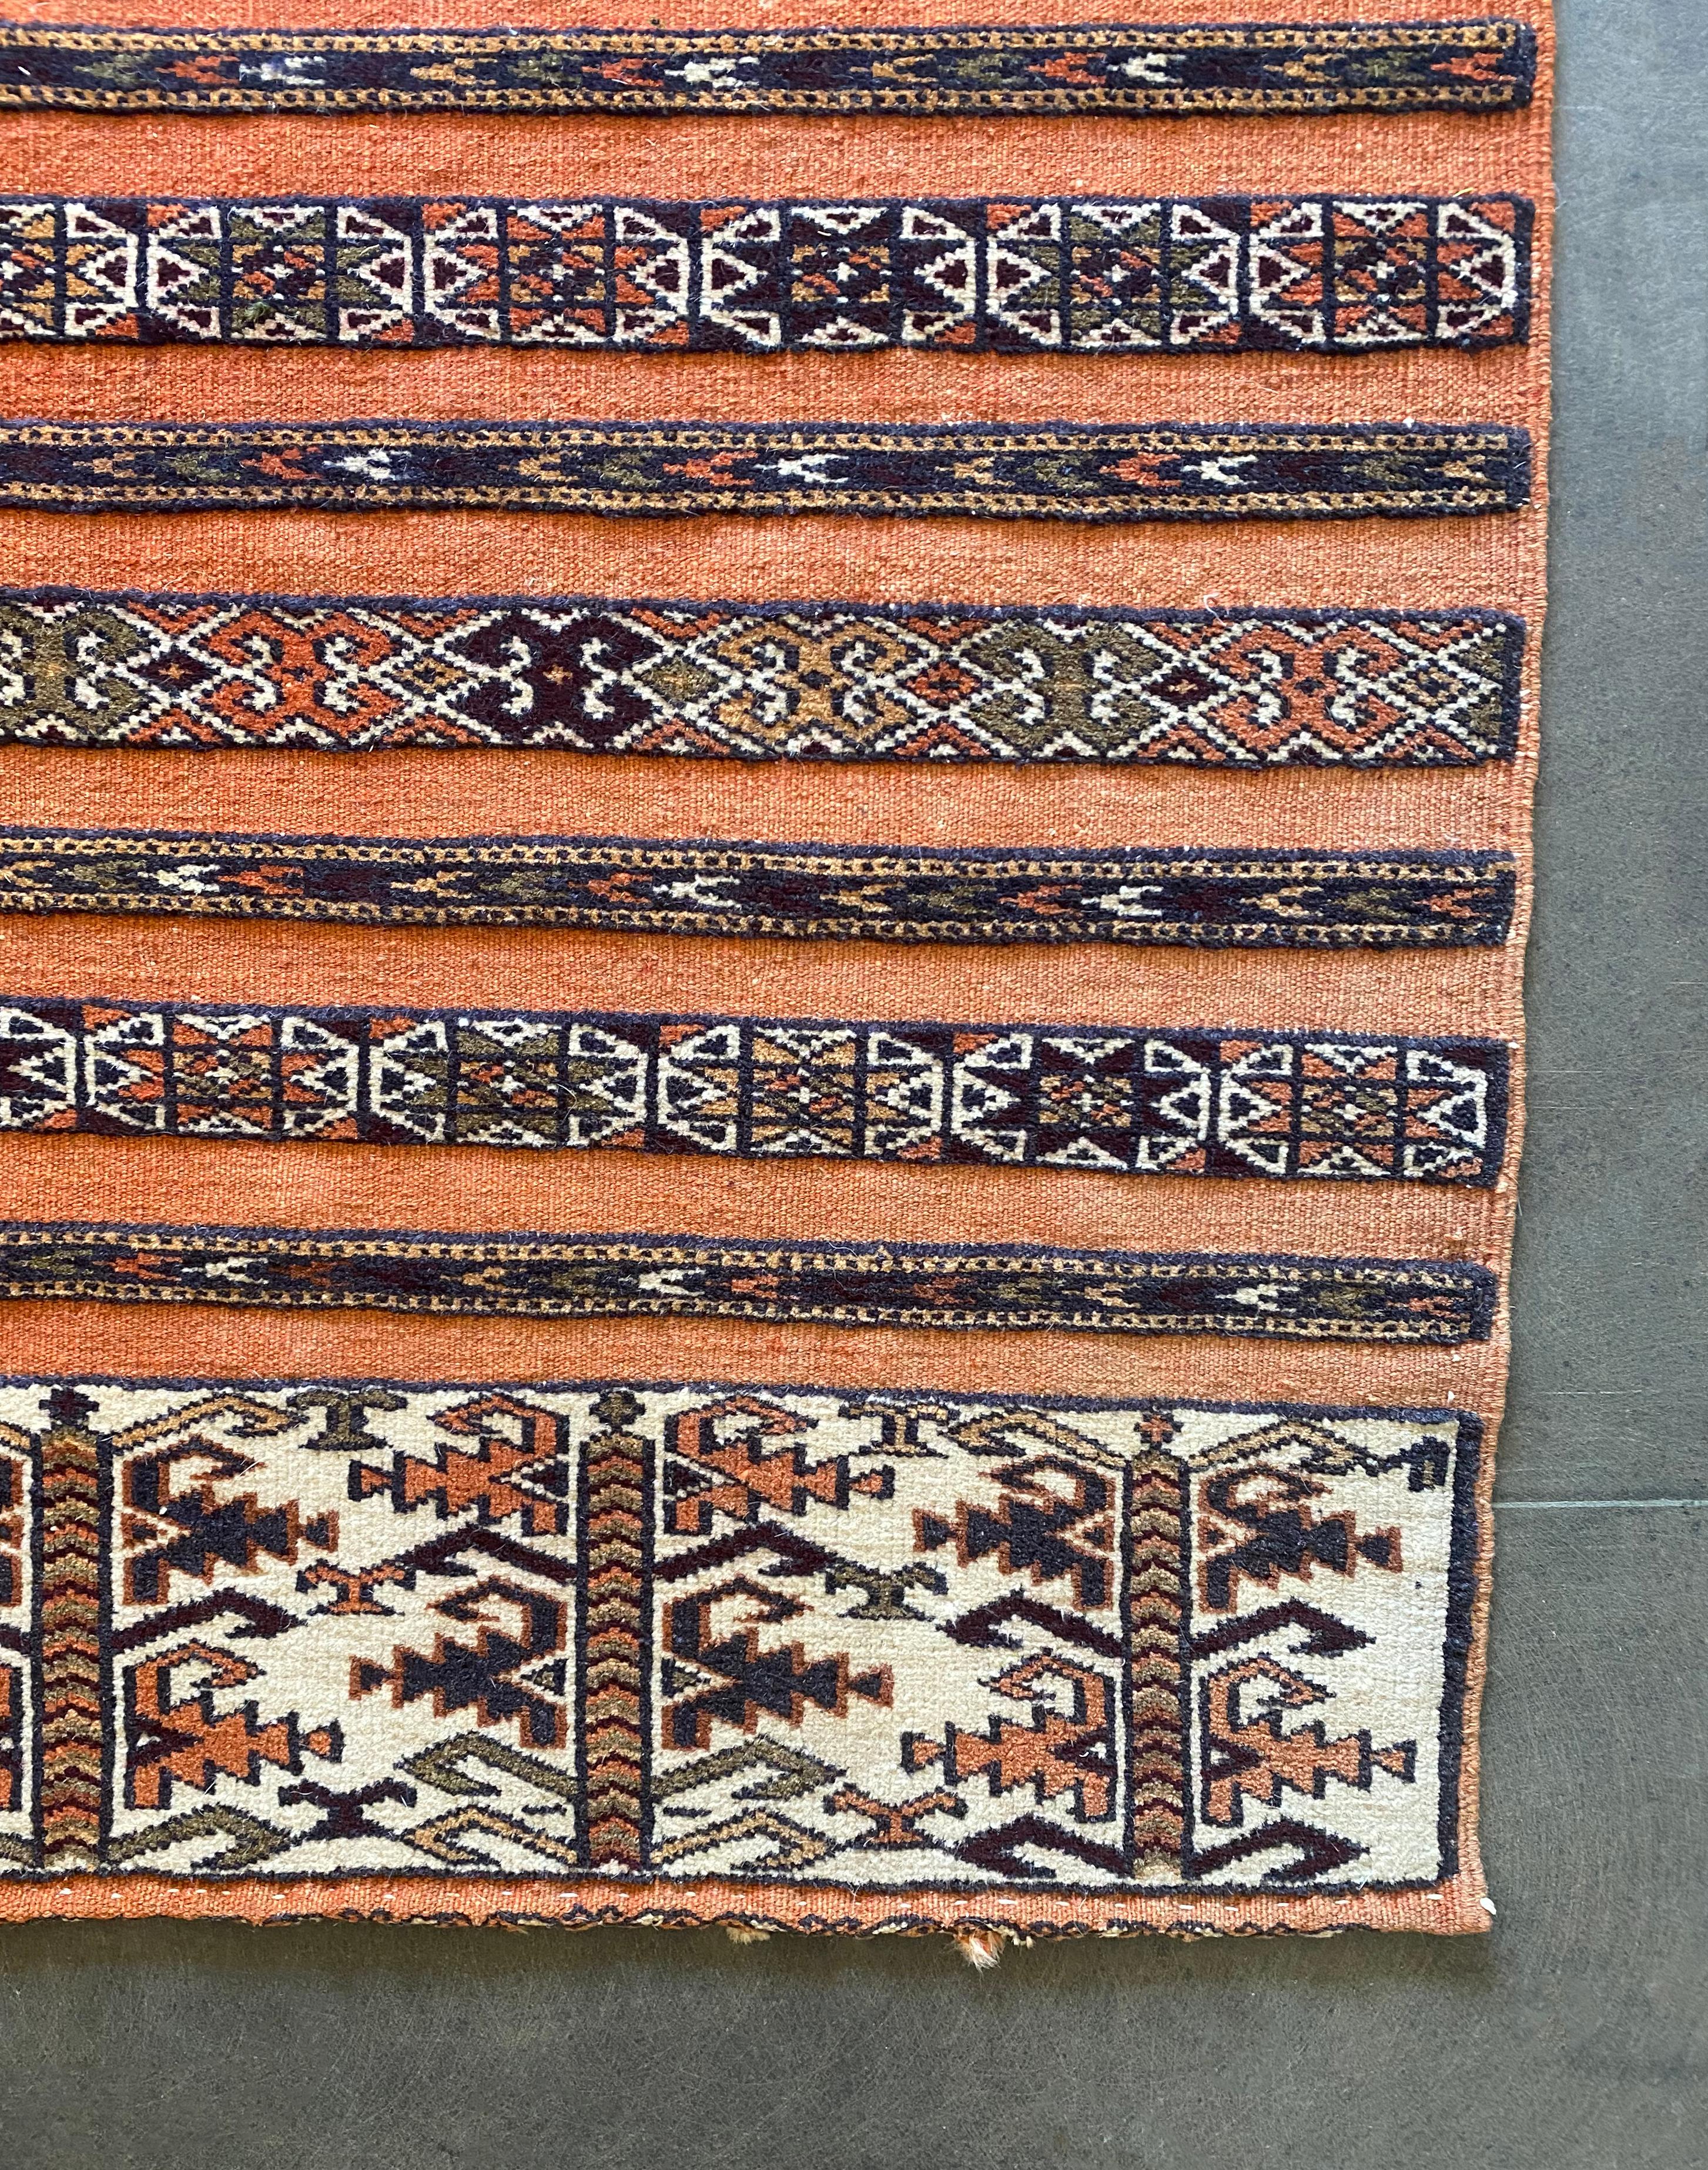 This Yomud tribal rug from Turkmenistan features a striking orange background as well as a mix of tribal detailing and motifs. It is composed of wool and originates from the early 20th century. 

Dimensions: Length 94cm x Width 130cm.